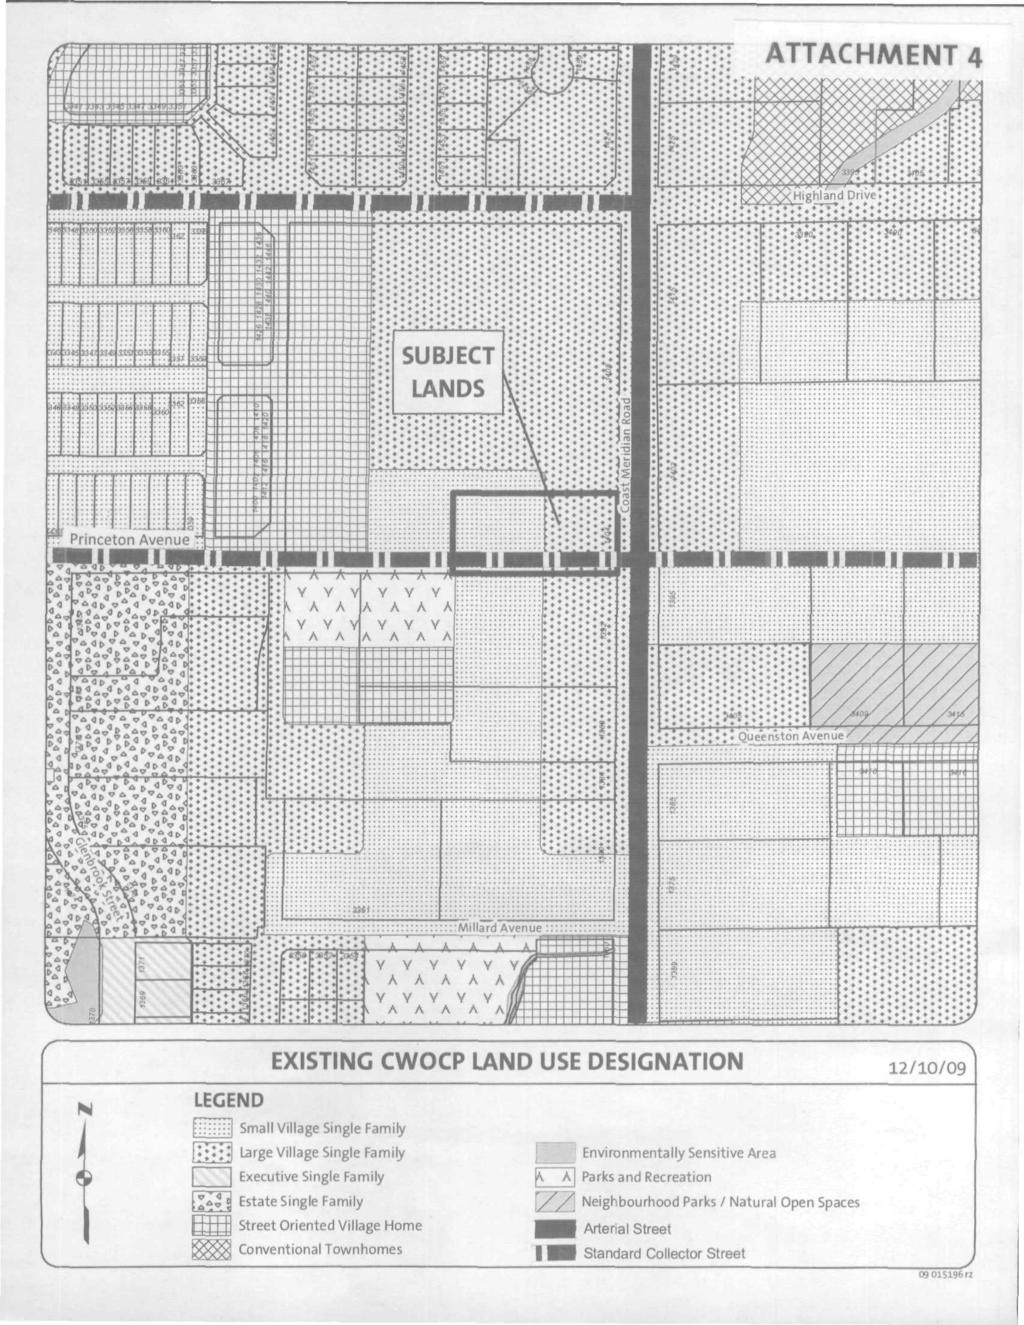 ATTACHMENT 4 EXISTING CWOCP LAND USE DESIGNATION 12/10/09 N LEGEND [;;;;;;;! Small village single Family t^ Large Village Single Family Executive Single Family 1.